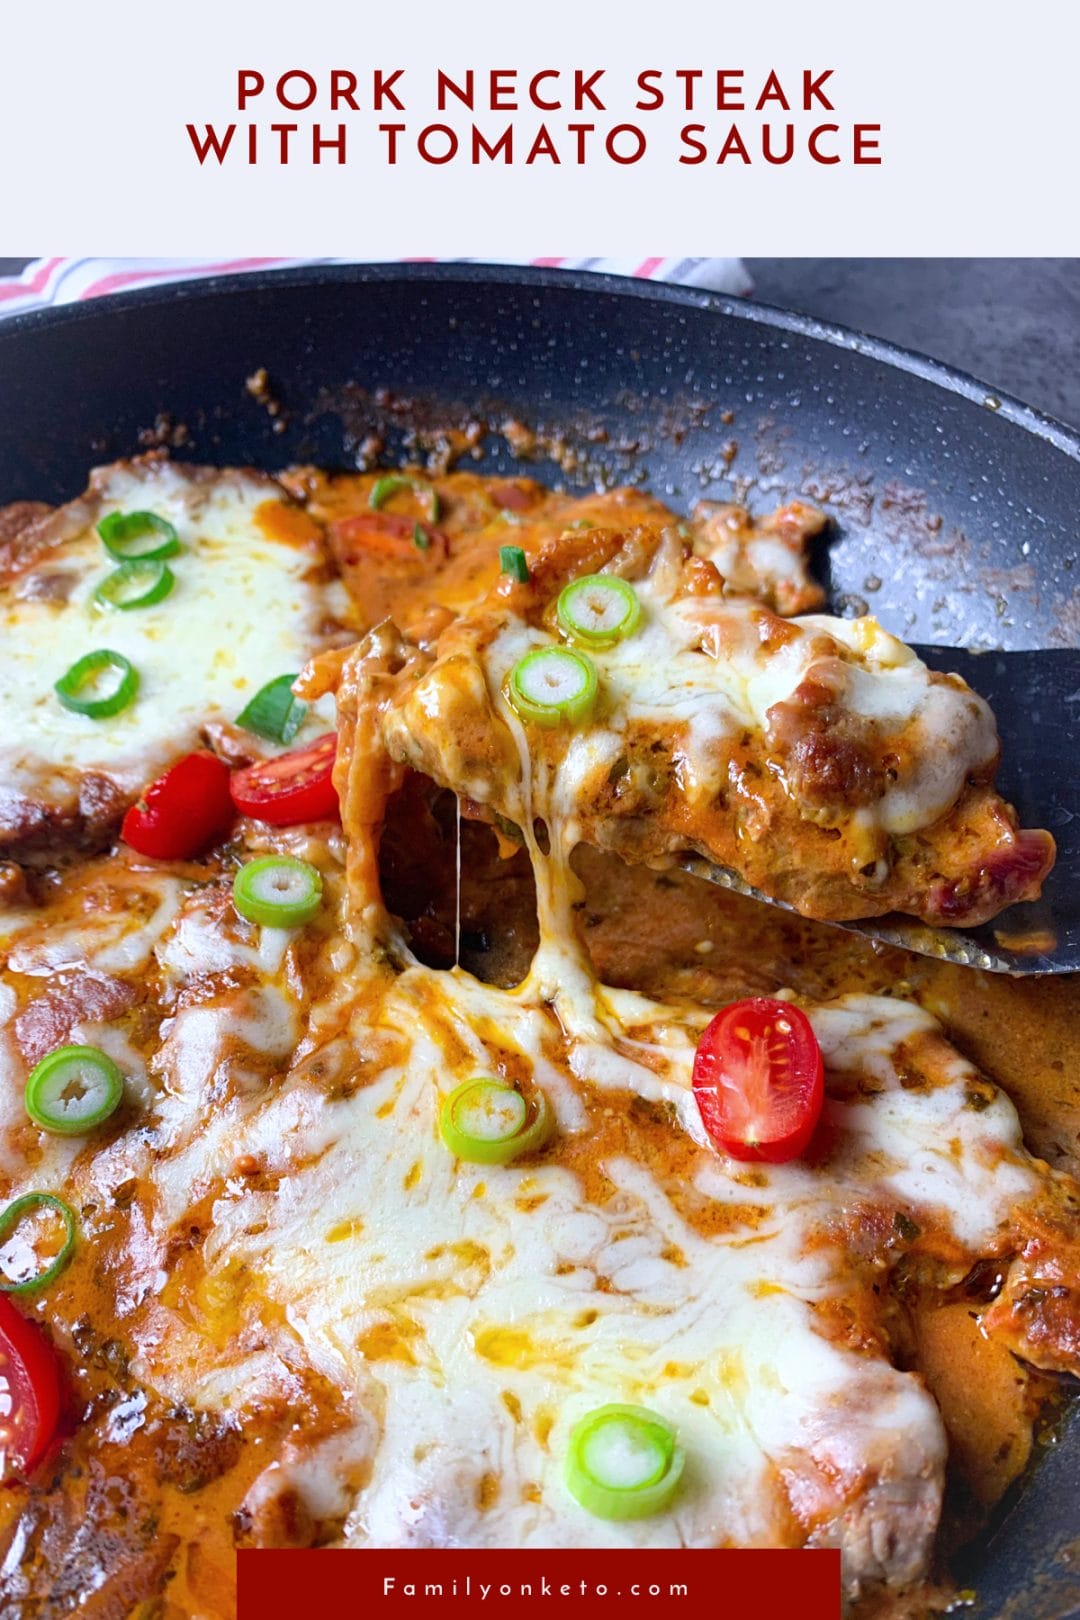 Pork neck steak with tomato sauce with melted mozzarella cooked in skillet